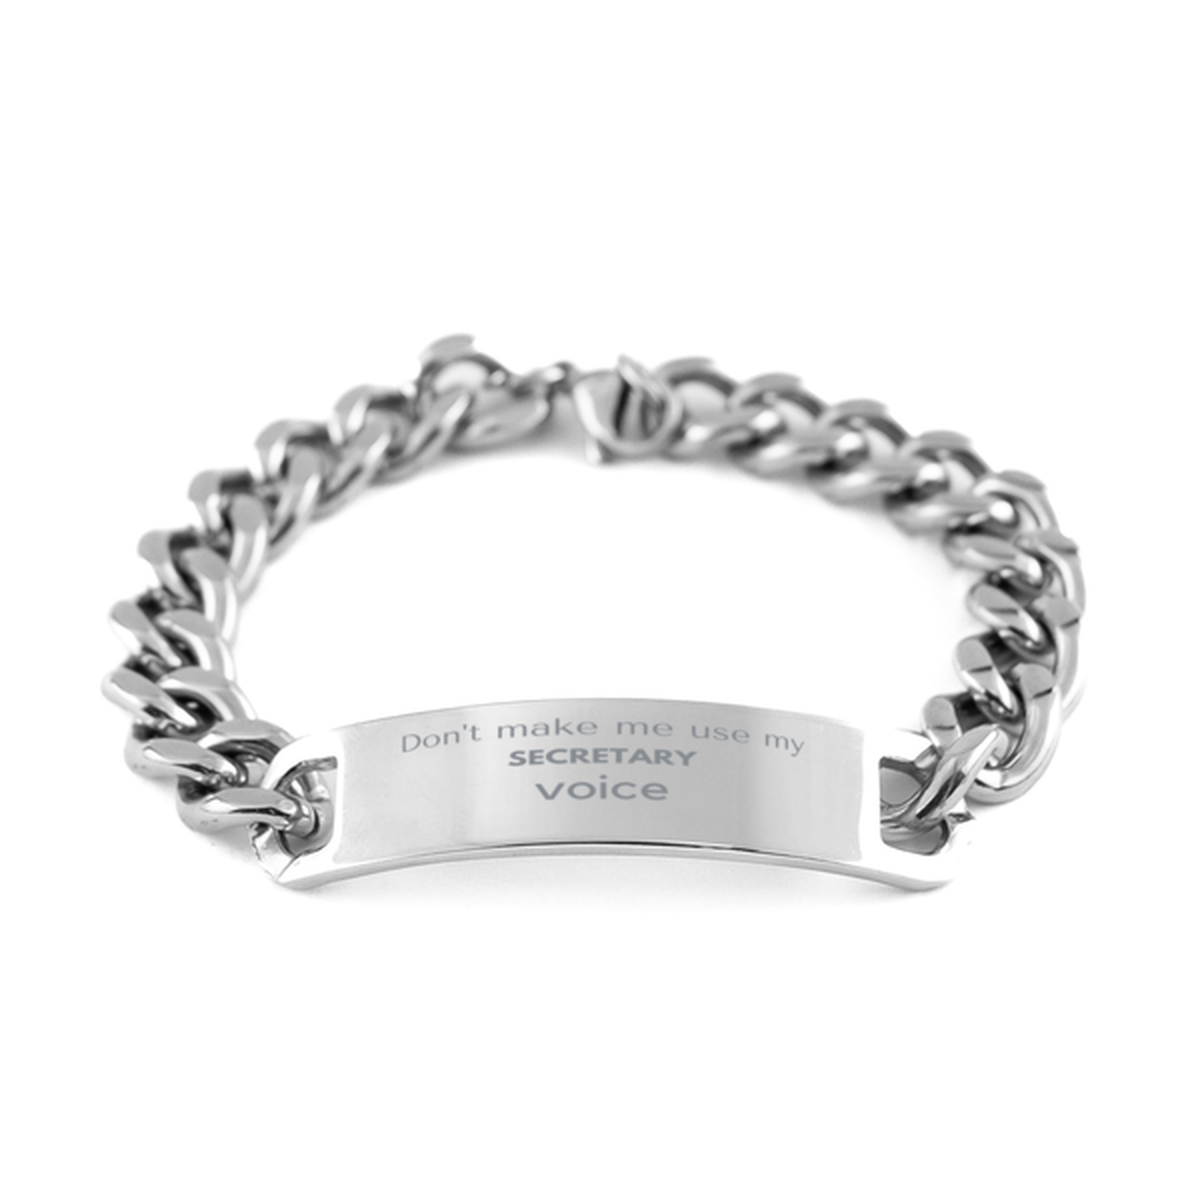 Don't make me use my Secretary voice, Sarcasm Secretary Gifts, Christmas Secretary Cuban Chain Stainless Steel Bracelet Birthday Unique Gifts For Secretary Coworkers, Men, Women, Colleague, Friends